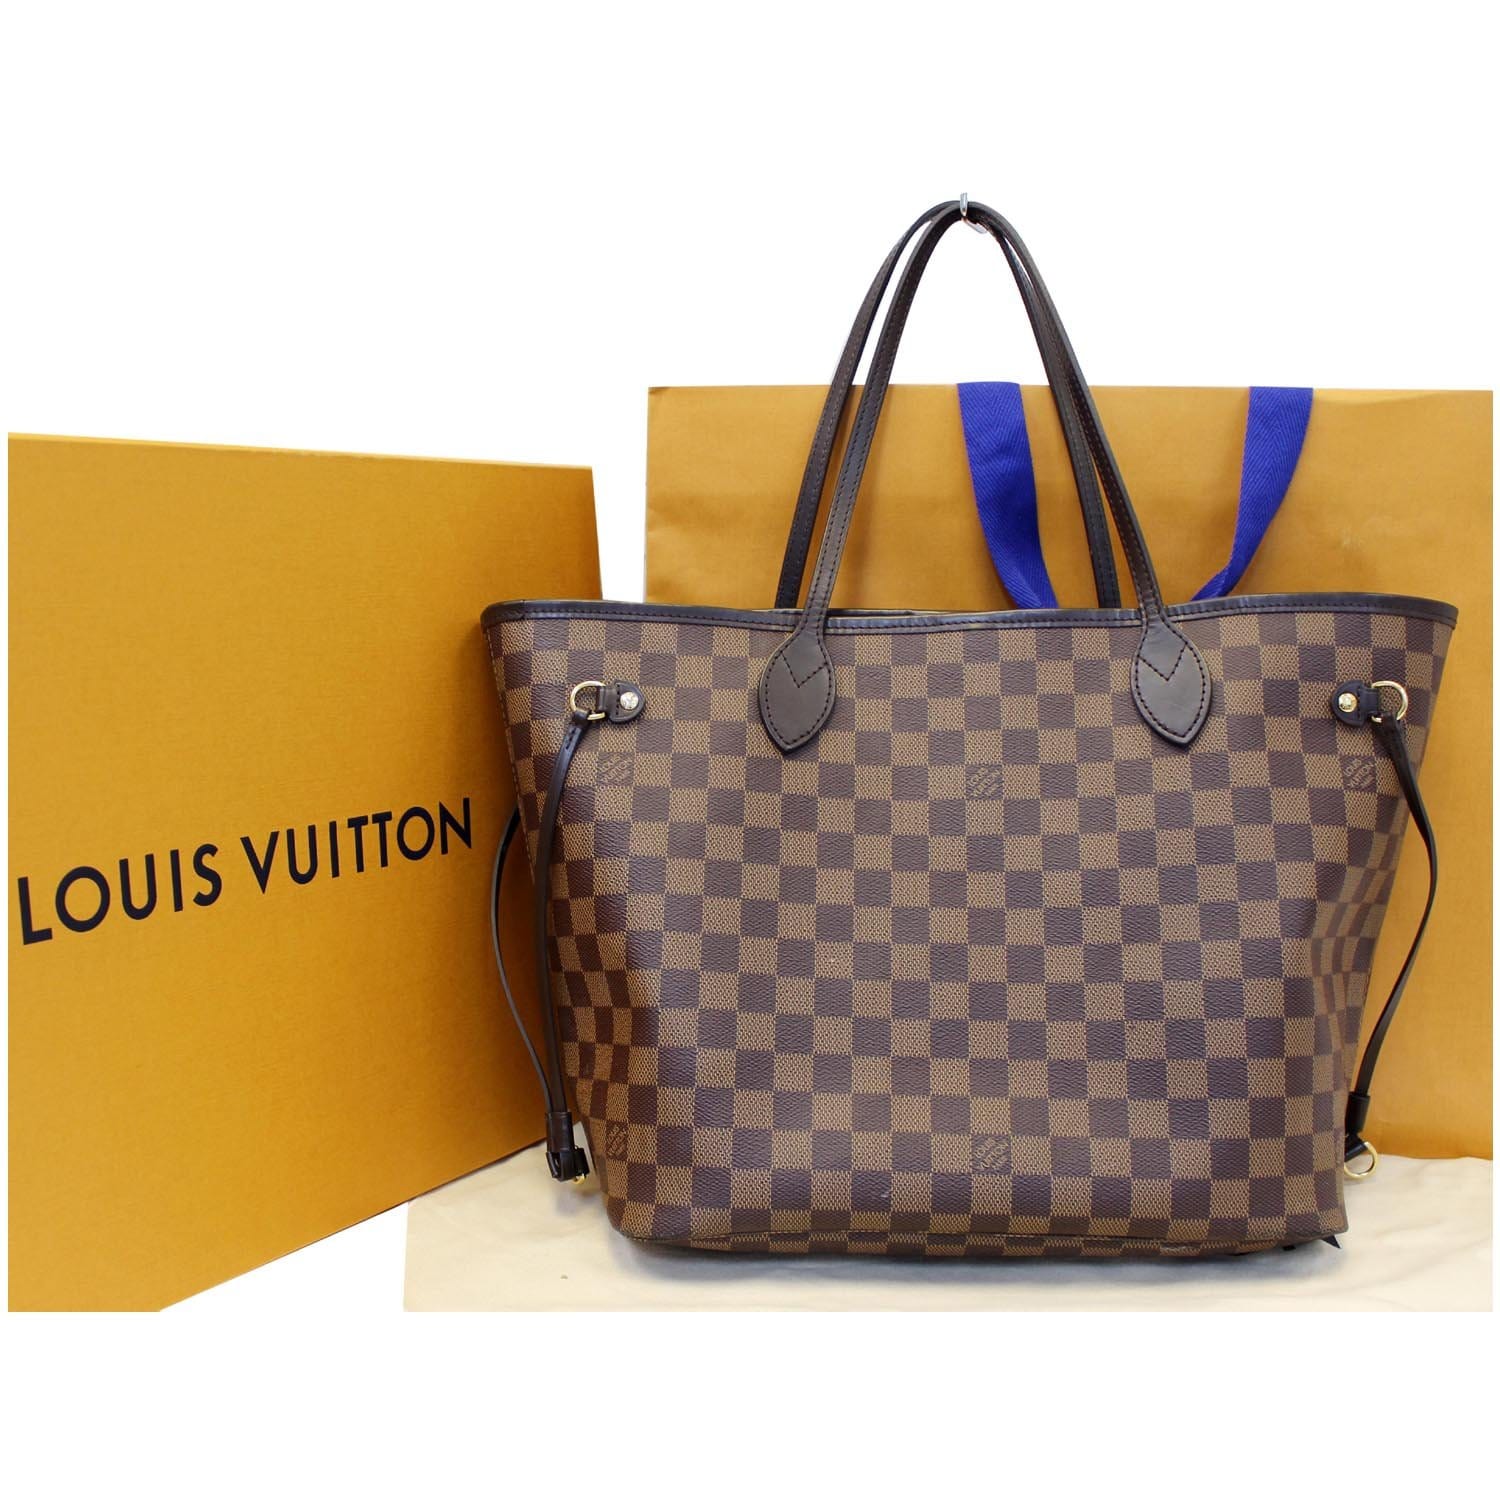 LOUIS VUITTON LOUIS VUITTON Neverfull MM Tote Bag N41358 Damier Brown Used  Women LV women N41358｜Product Code：2100301023444｜BRAND OFF Online Store